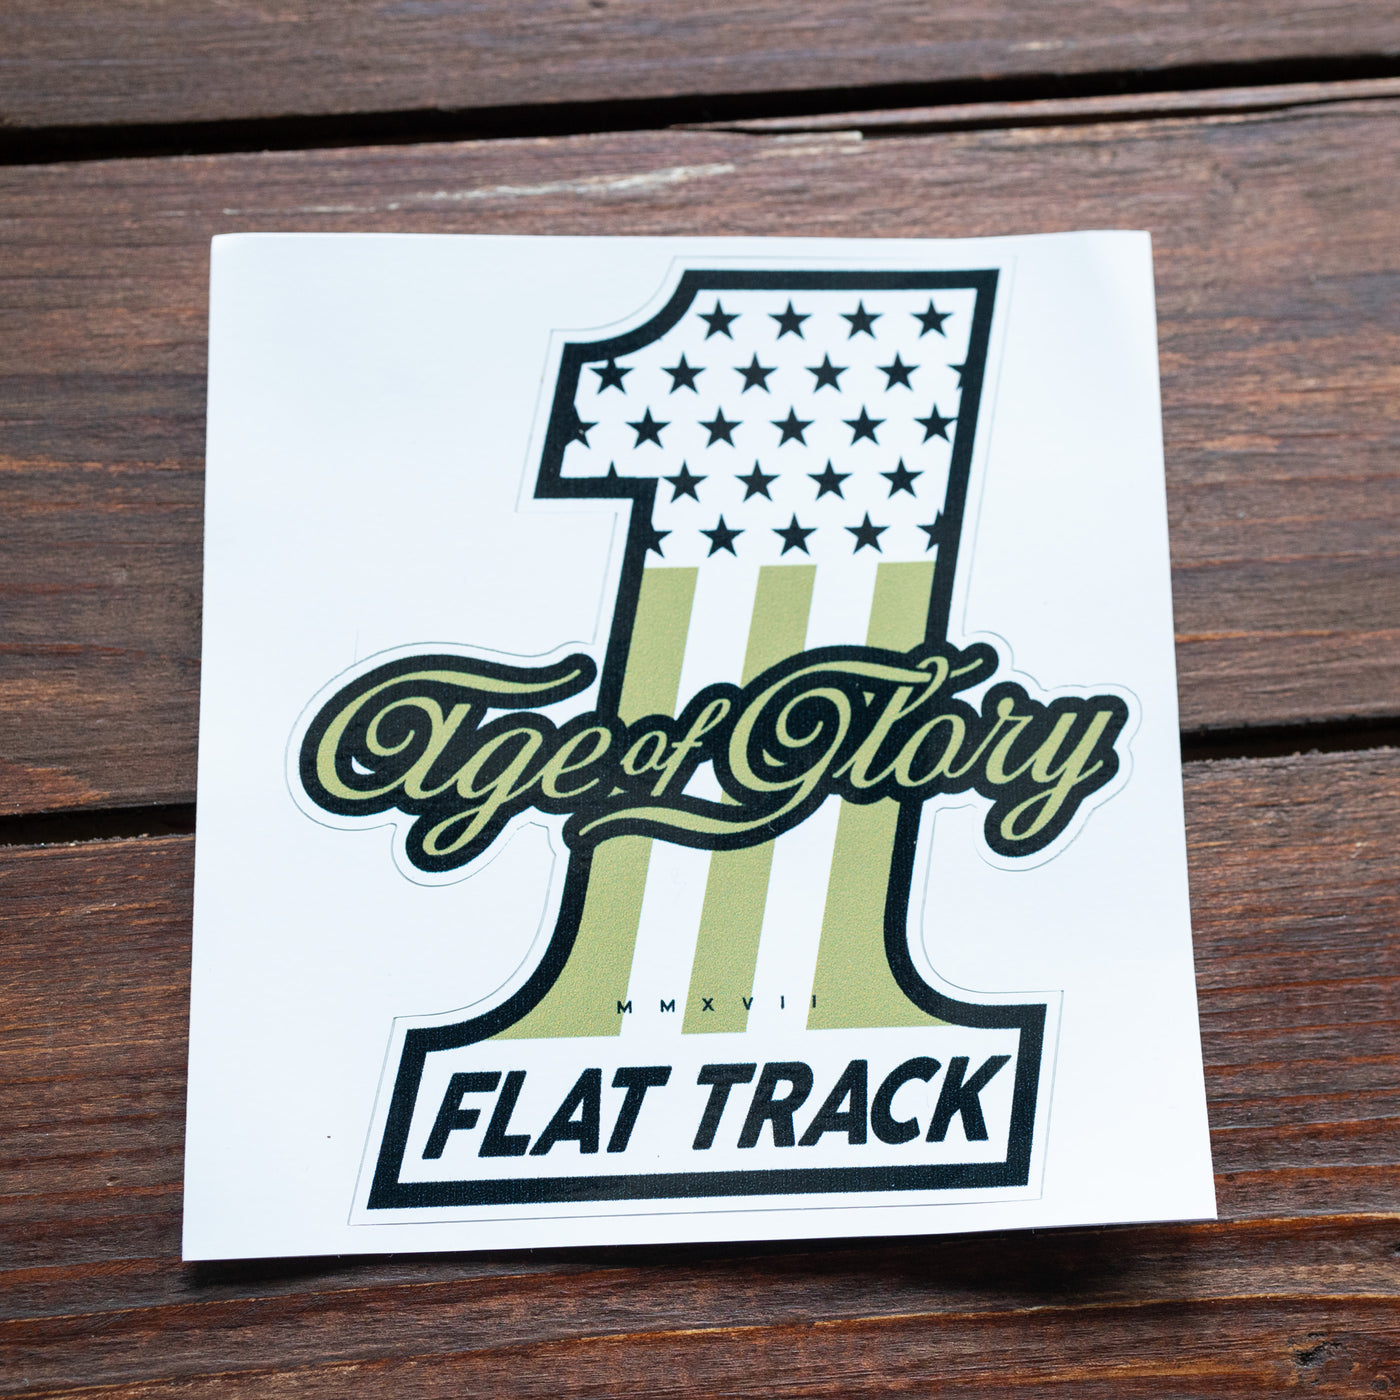 Age of Glory Stickers pack 1